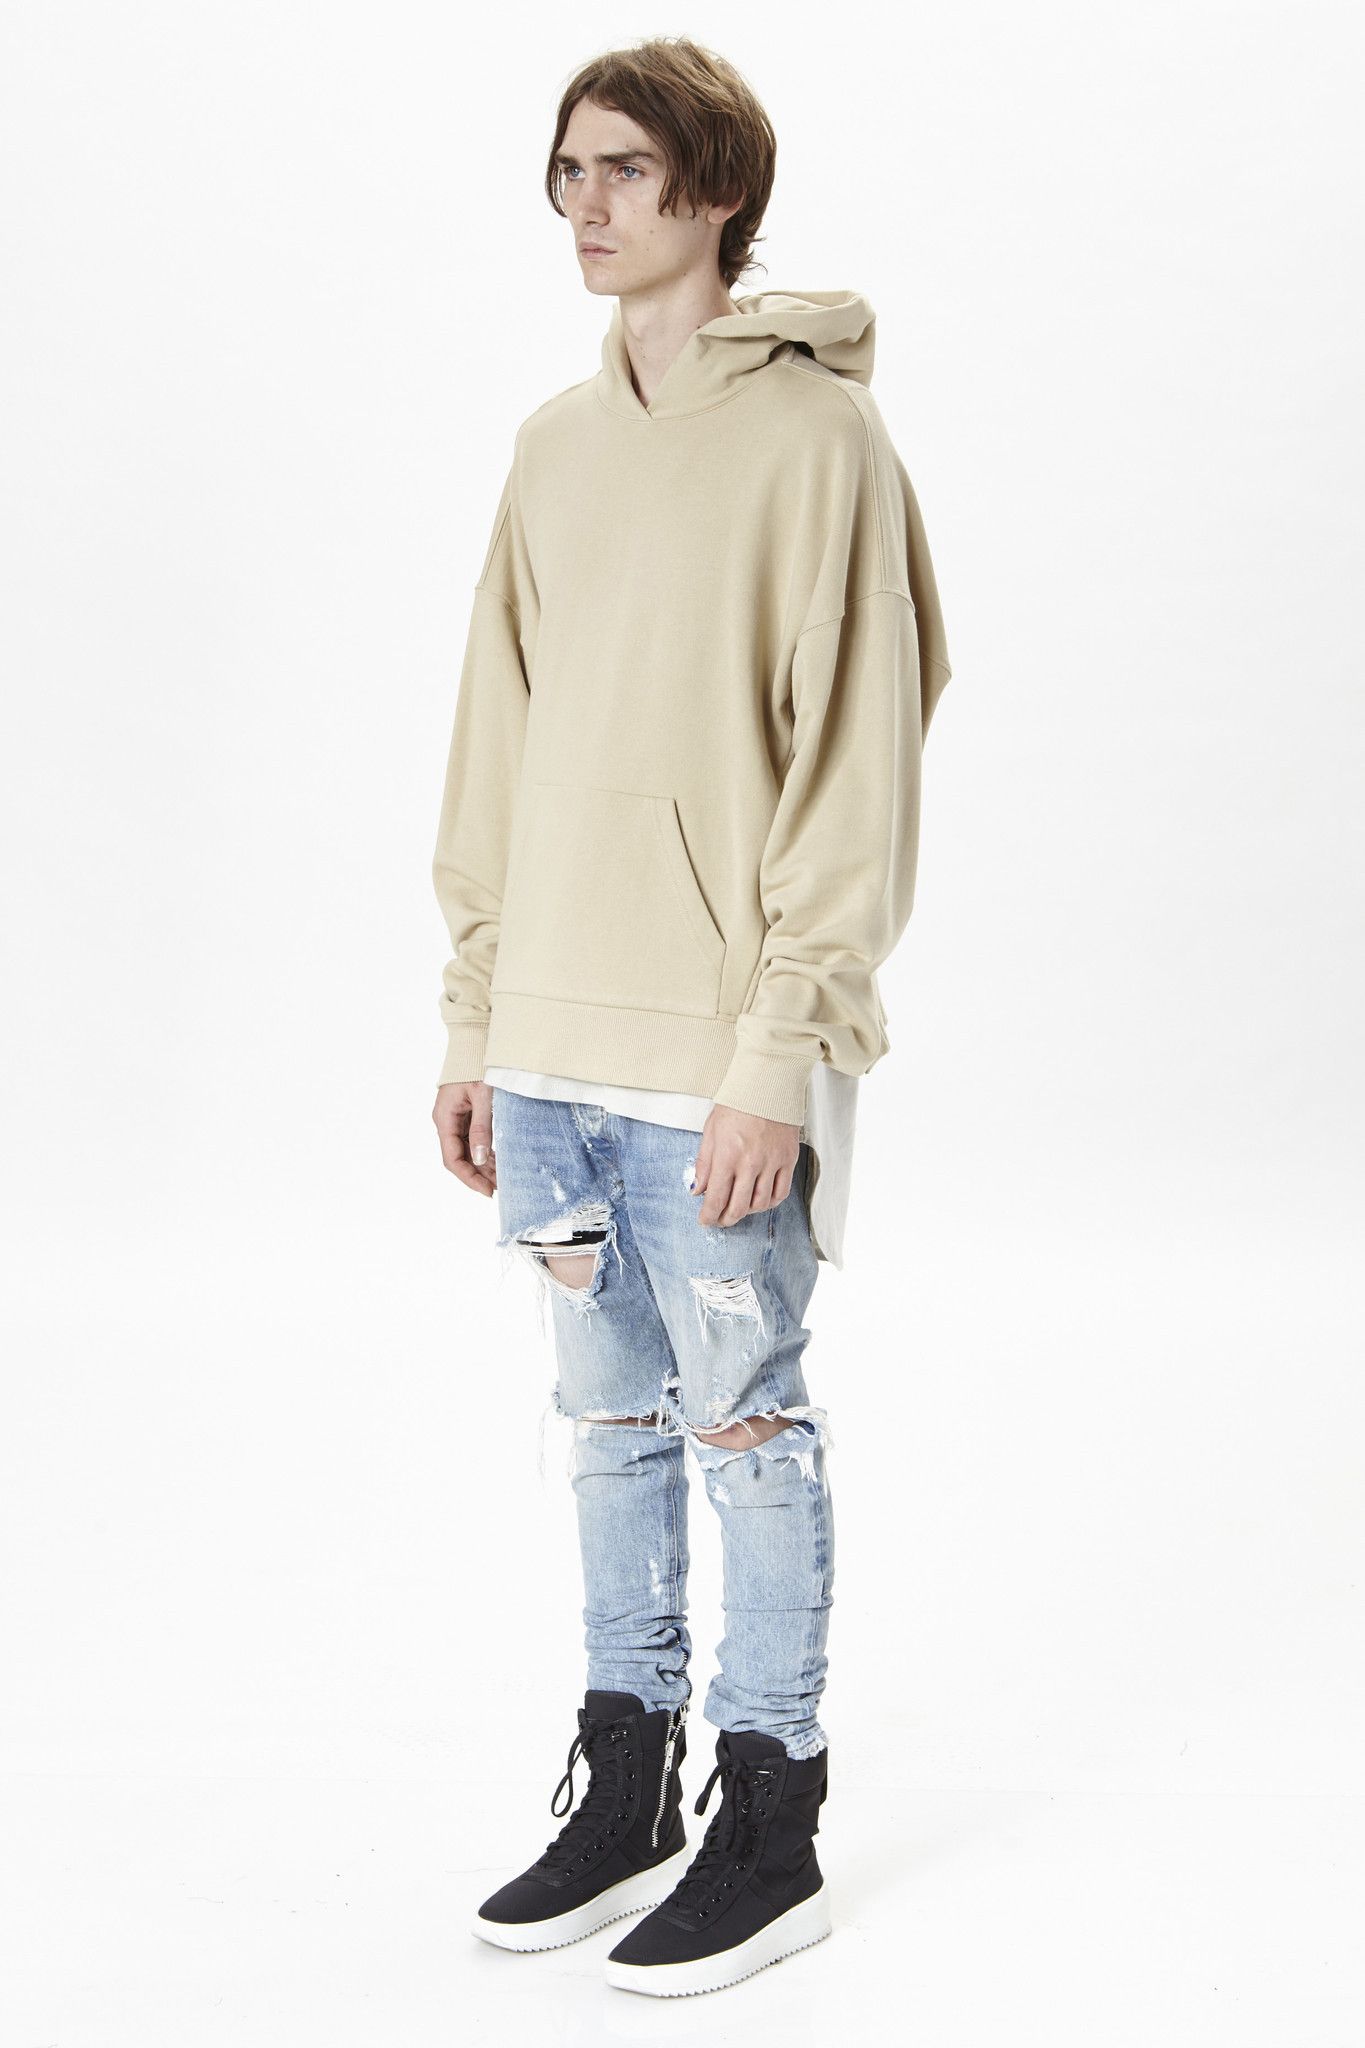 Fear of God 4th Collection Everyday Hoodie Khaki | Grailed